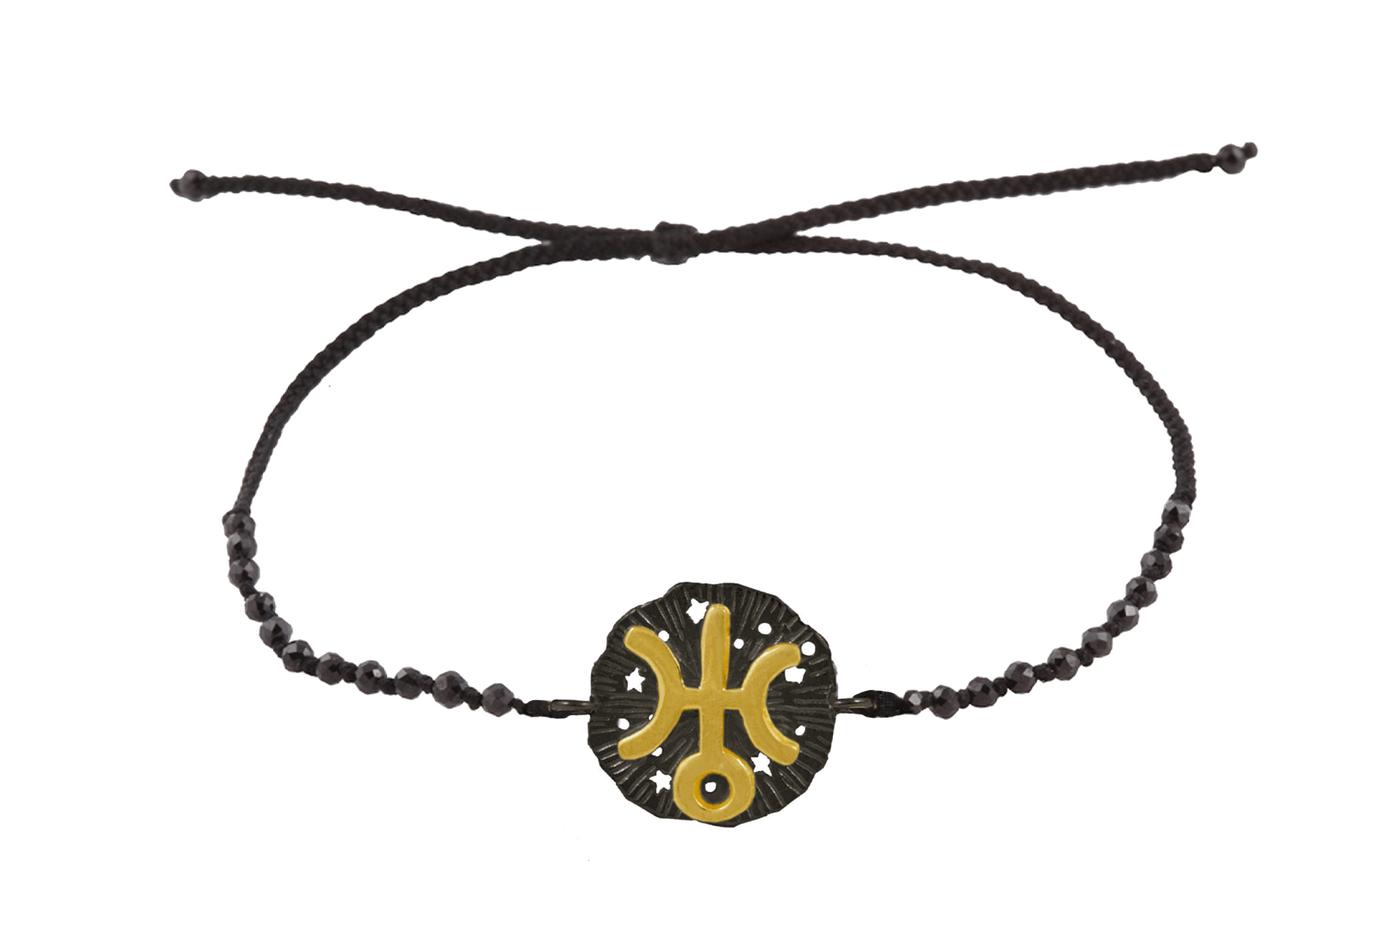 Uranus Medallion Amulet bracelet with beads. Gold plated and oxide